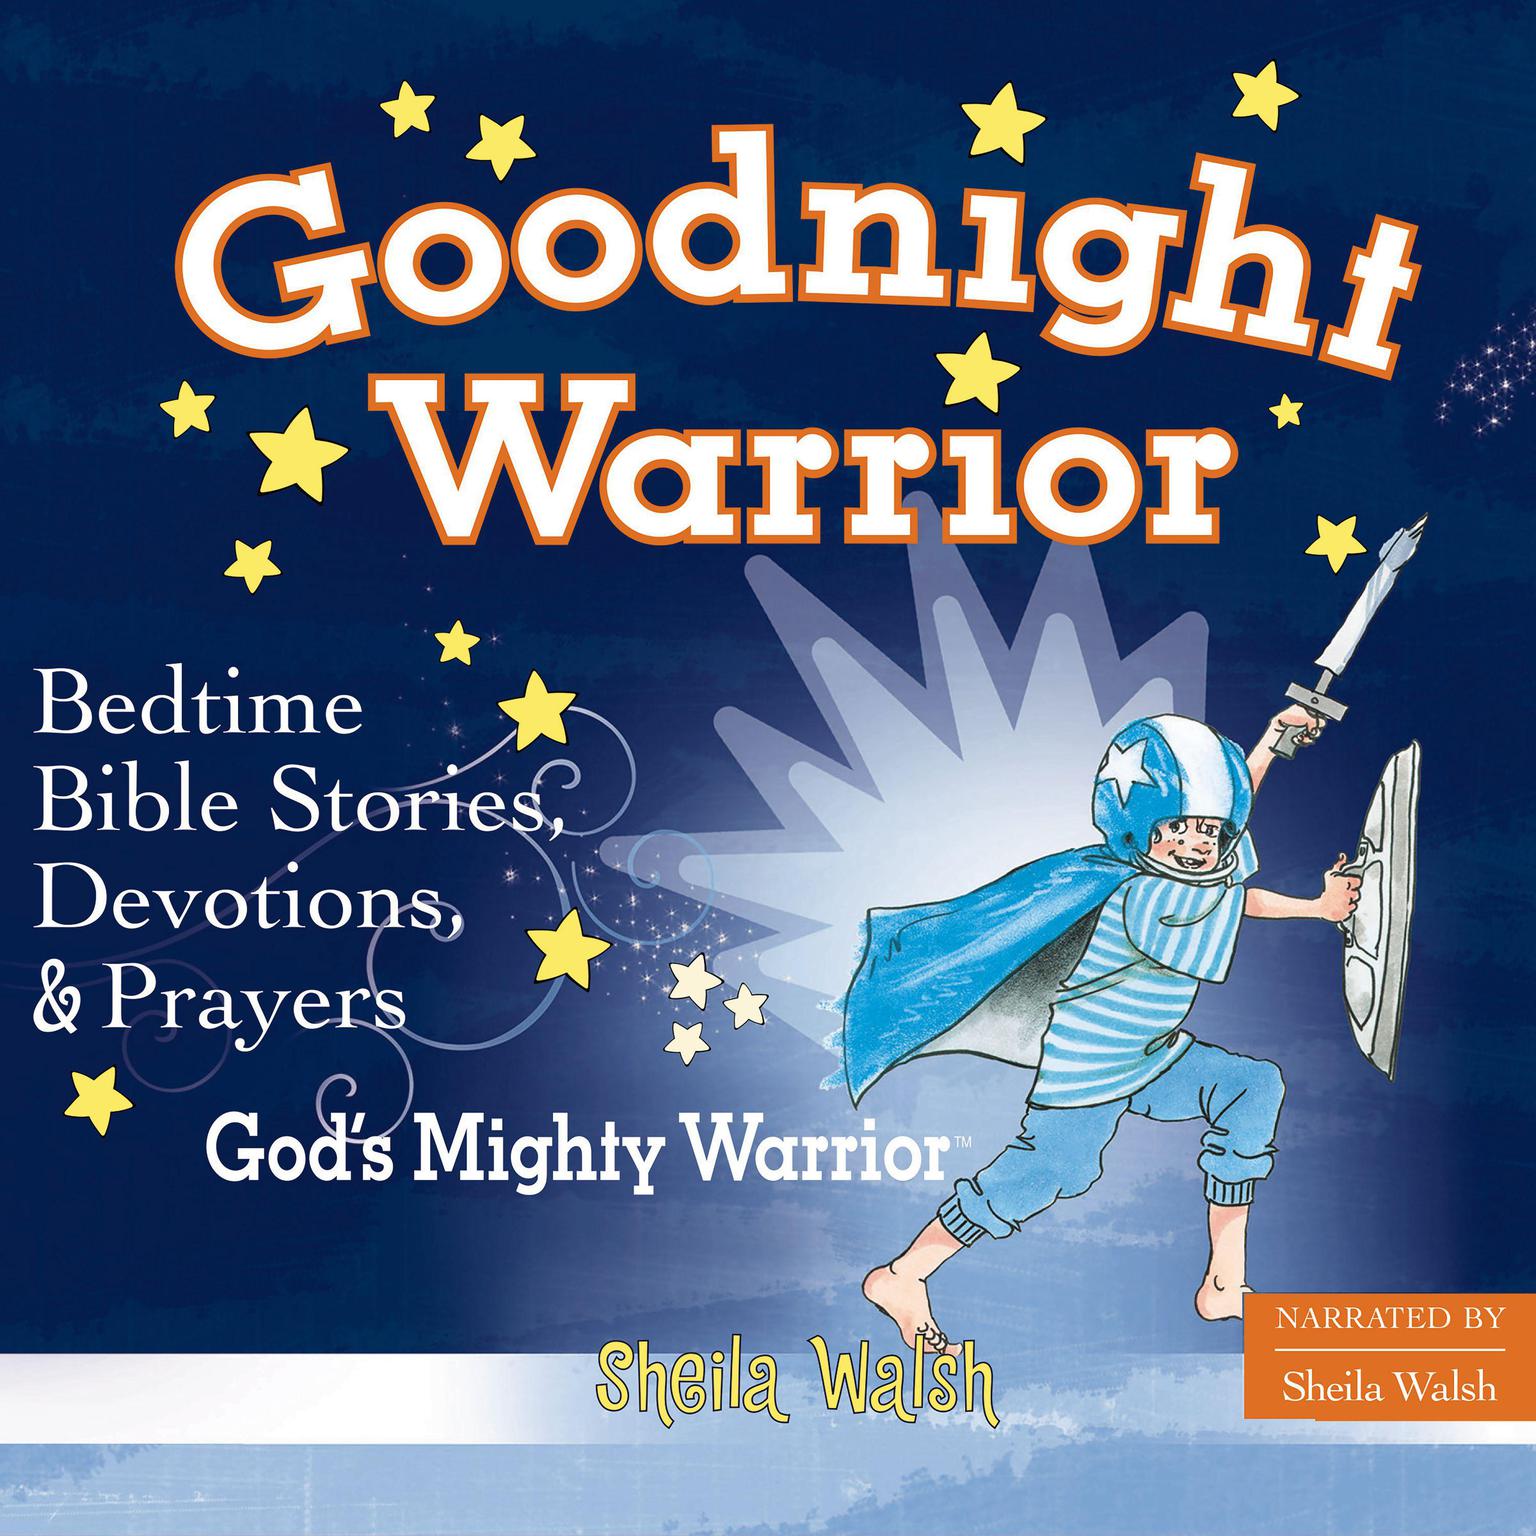 Good Night Warrior: 81 Favorite Bedtime Bible Stories Read by Sheila Walsh Audiobook, by Sheila Walsh